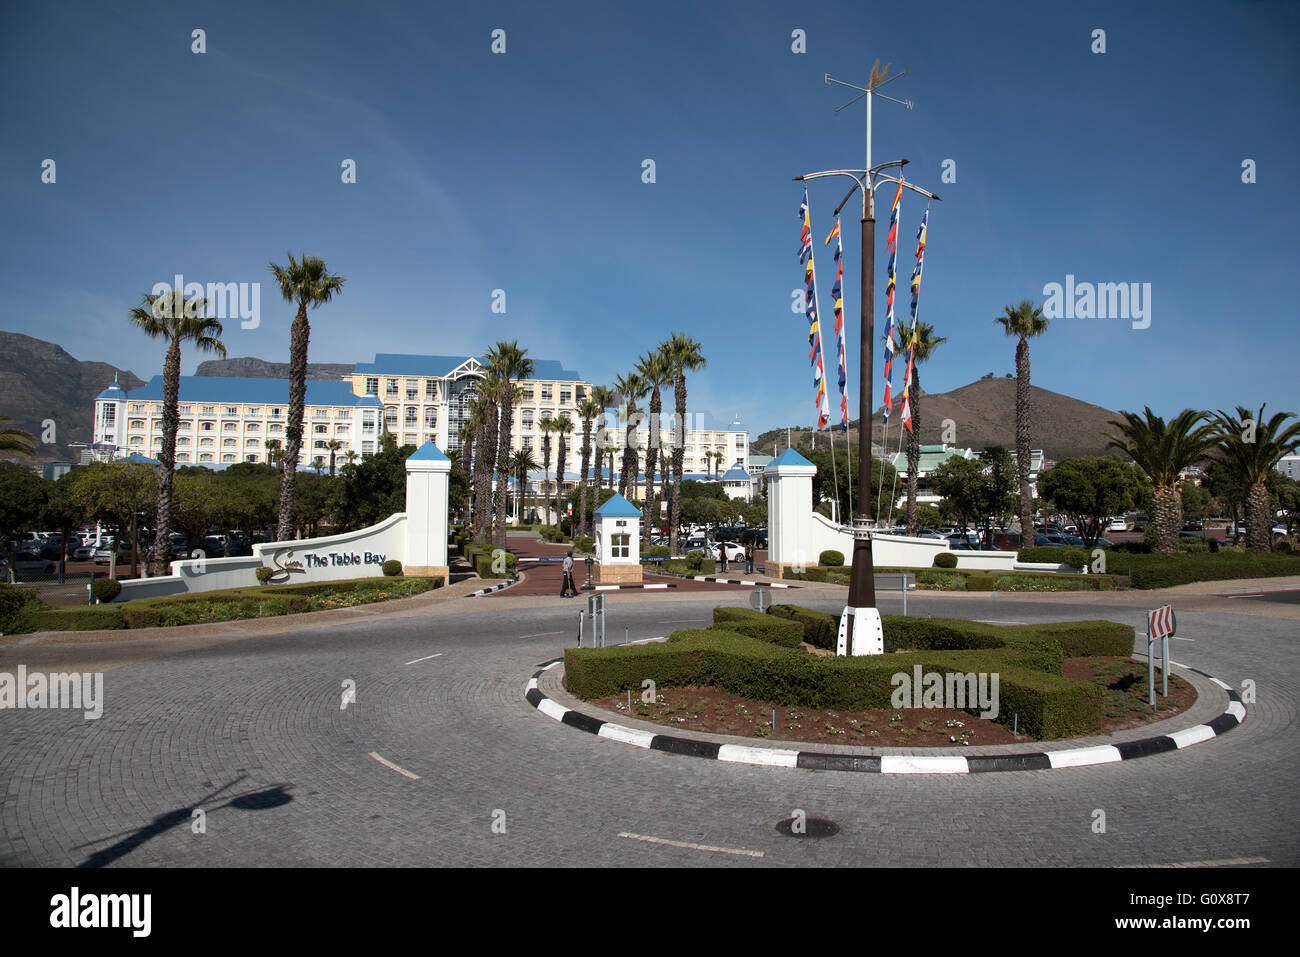 Table Bay hotel on the Waterfront in Cape Town South Africa Stock Photo